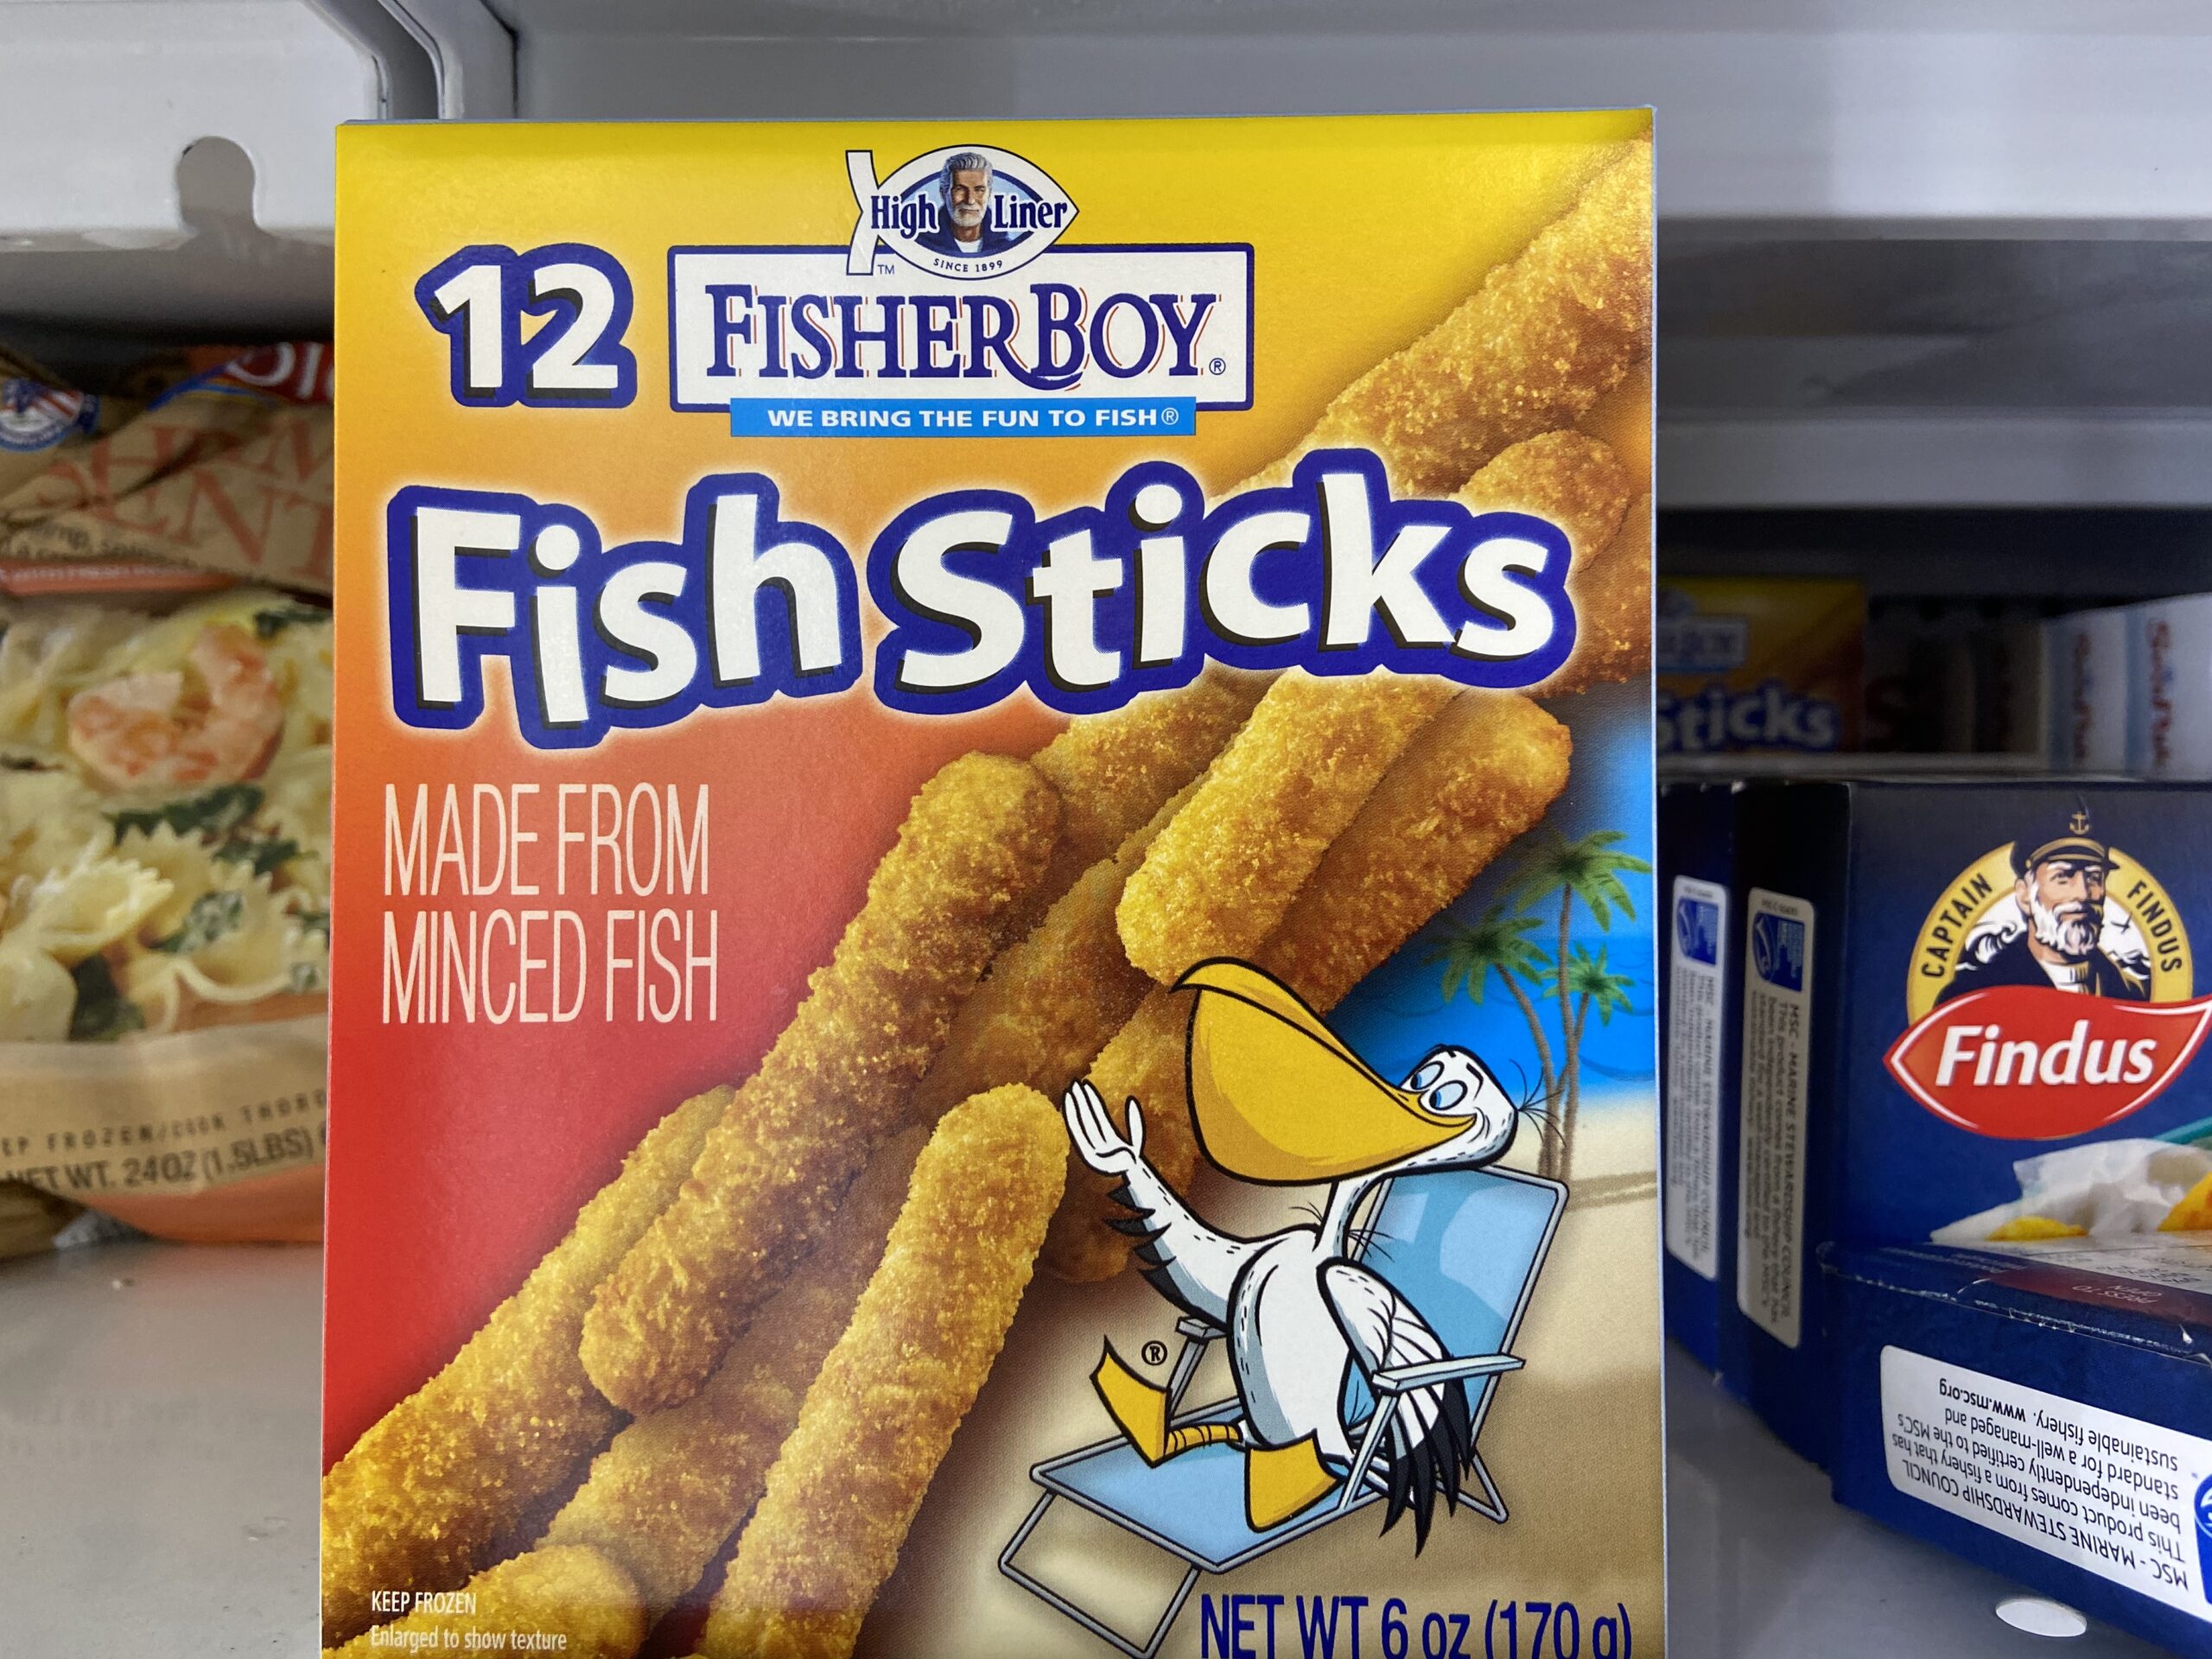 Fisher Boy Fish Sticks JUST Each With Giant Deal, 52% OFF